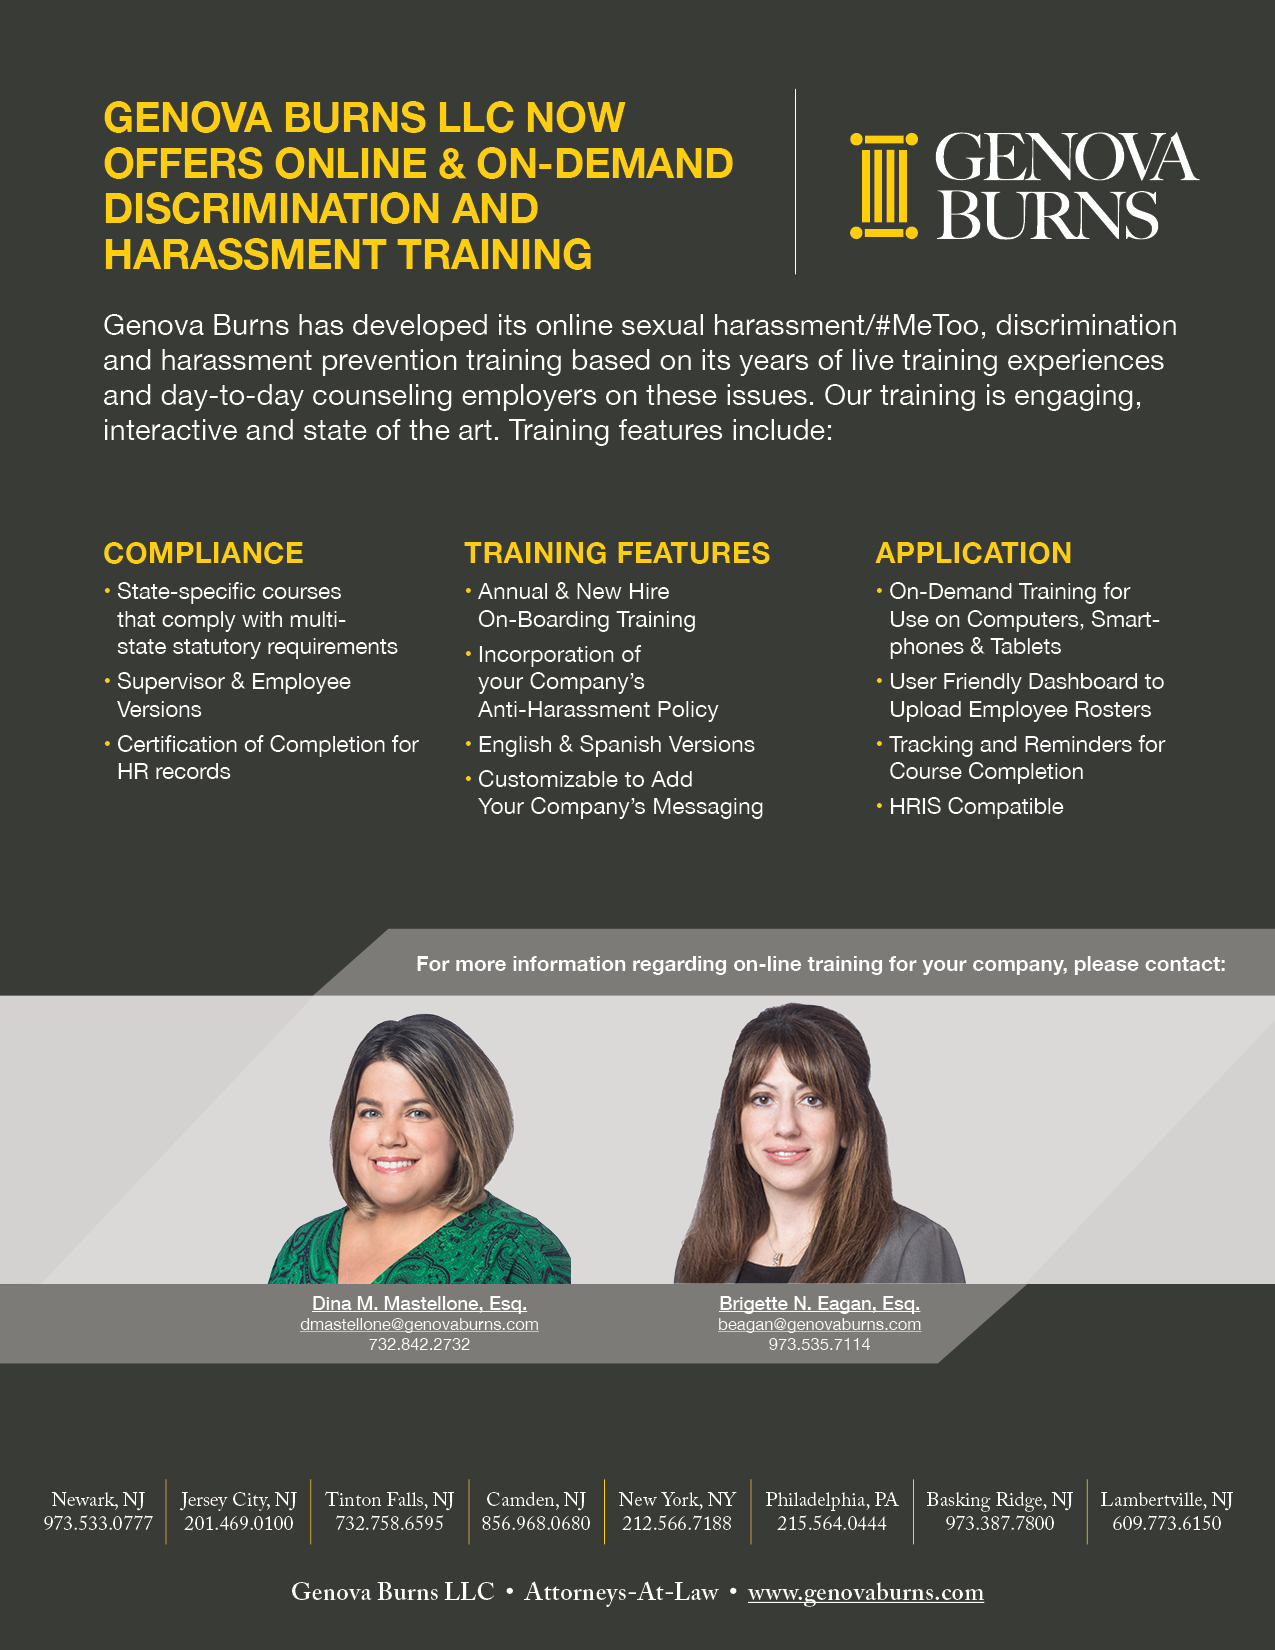 Genova Burns Now Offers On-Line & On-Demand Discrimination and Harassment Training